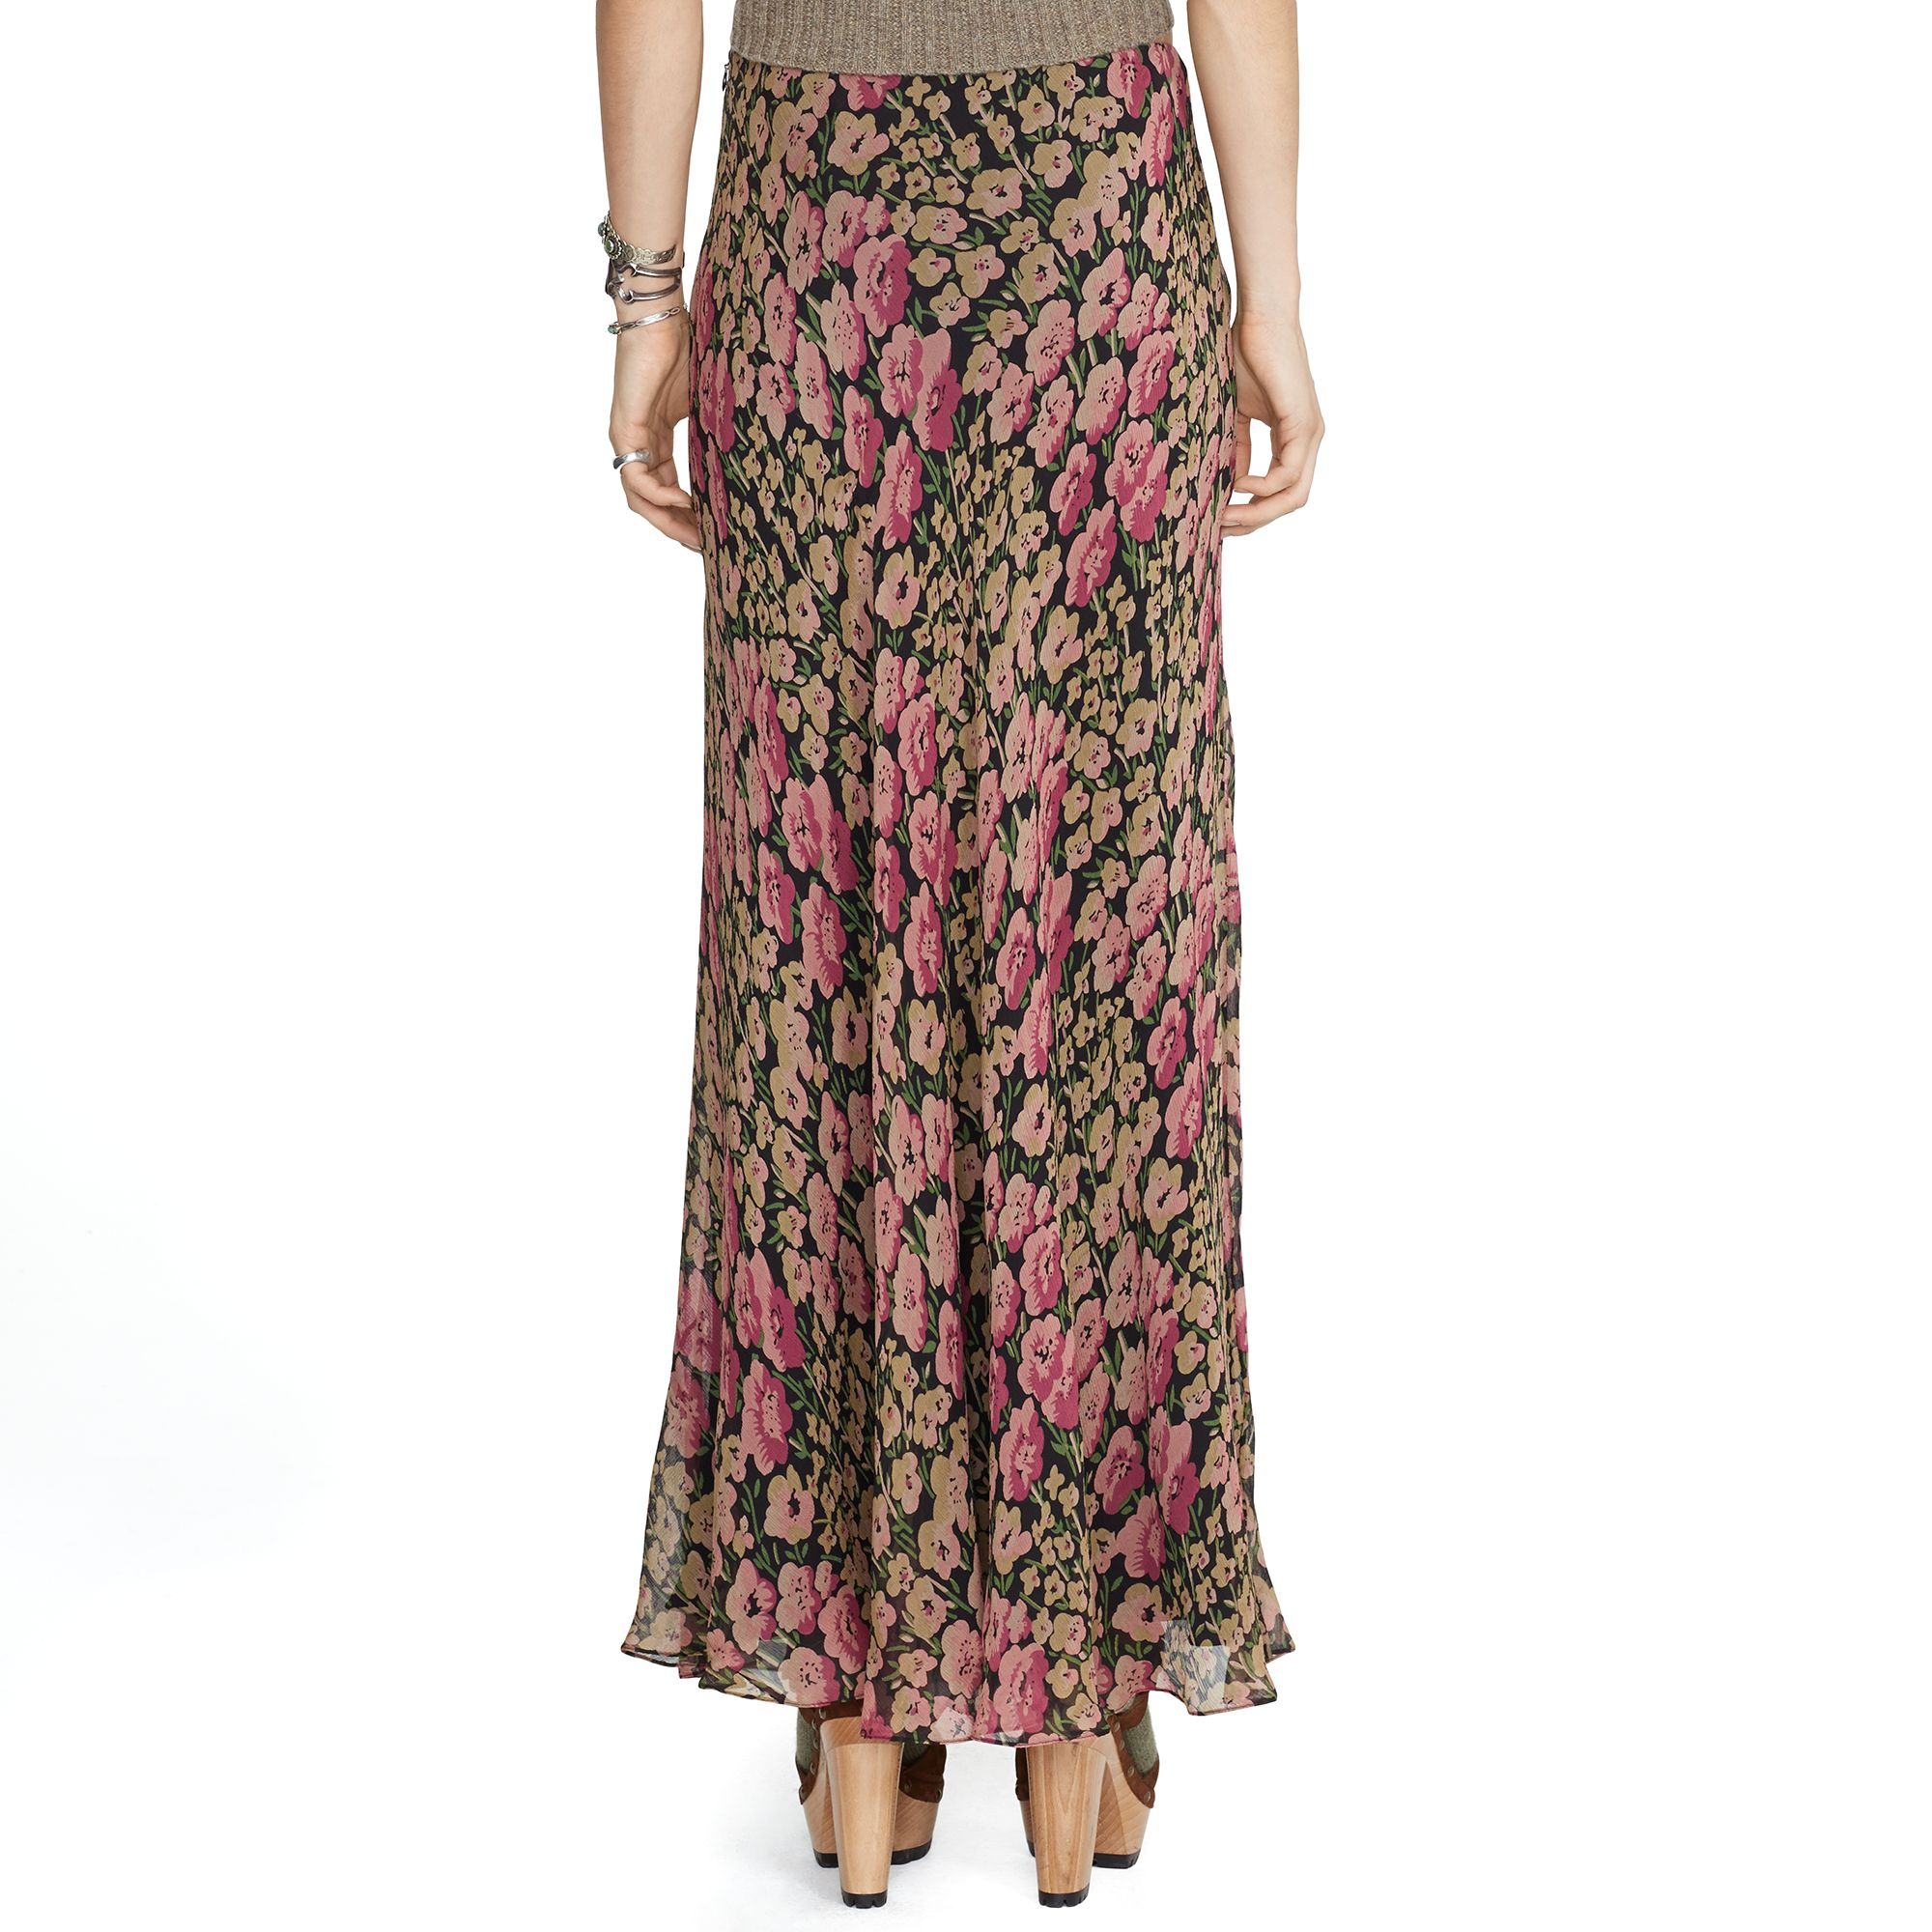 Polo ralph lauren Crinkled Silk Floral Skirt in Floral | Lyst